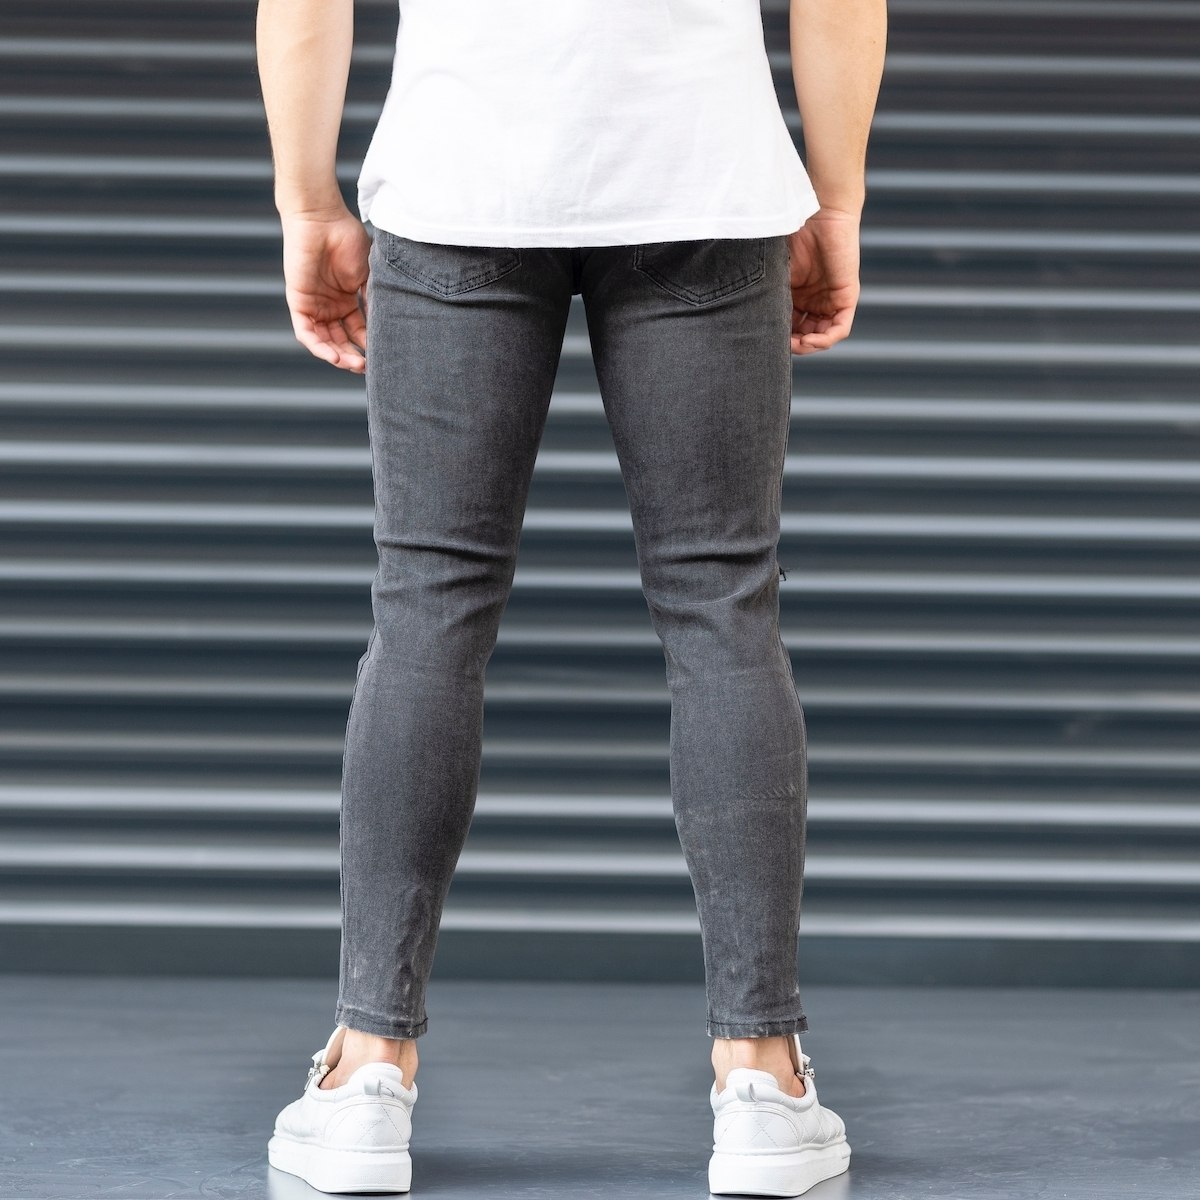 Men's Jeans With Rips In Smoked Gray